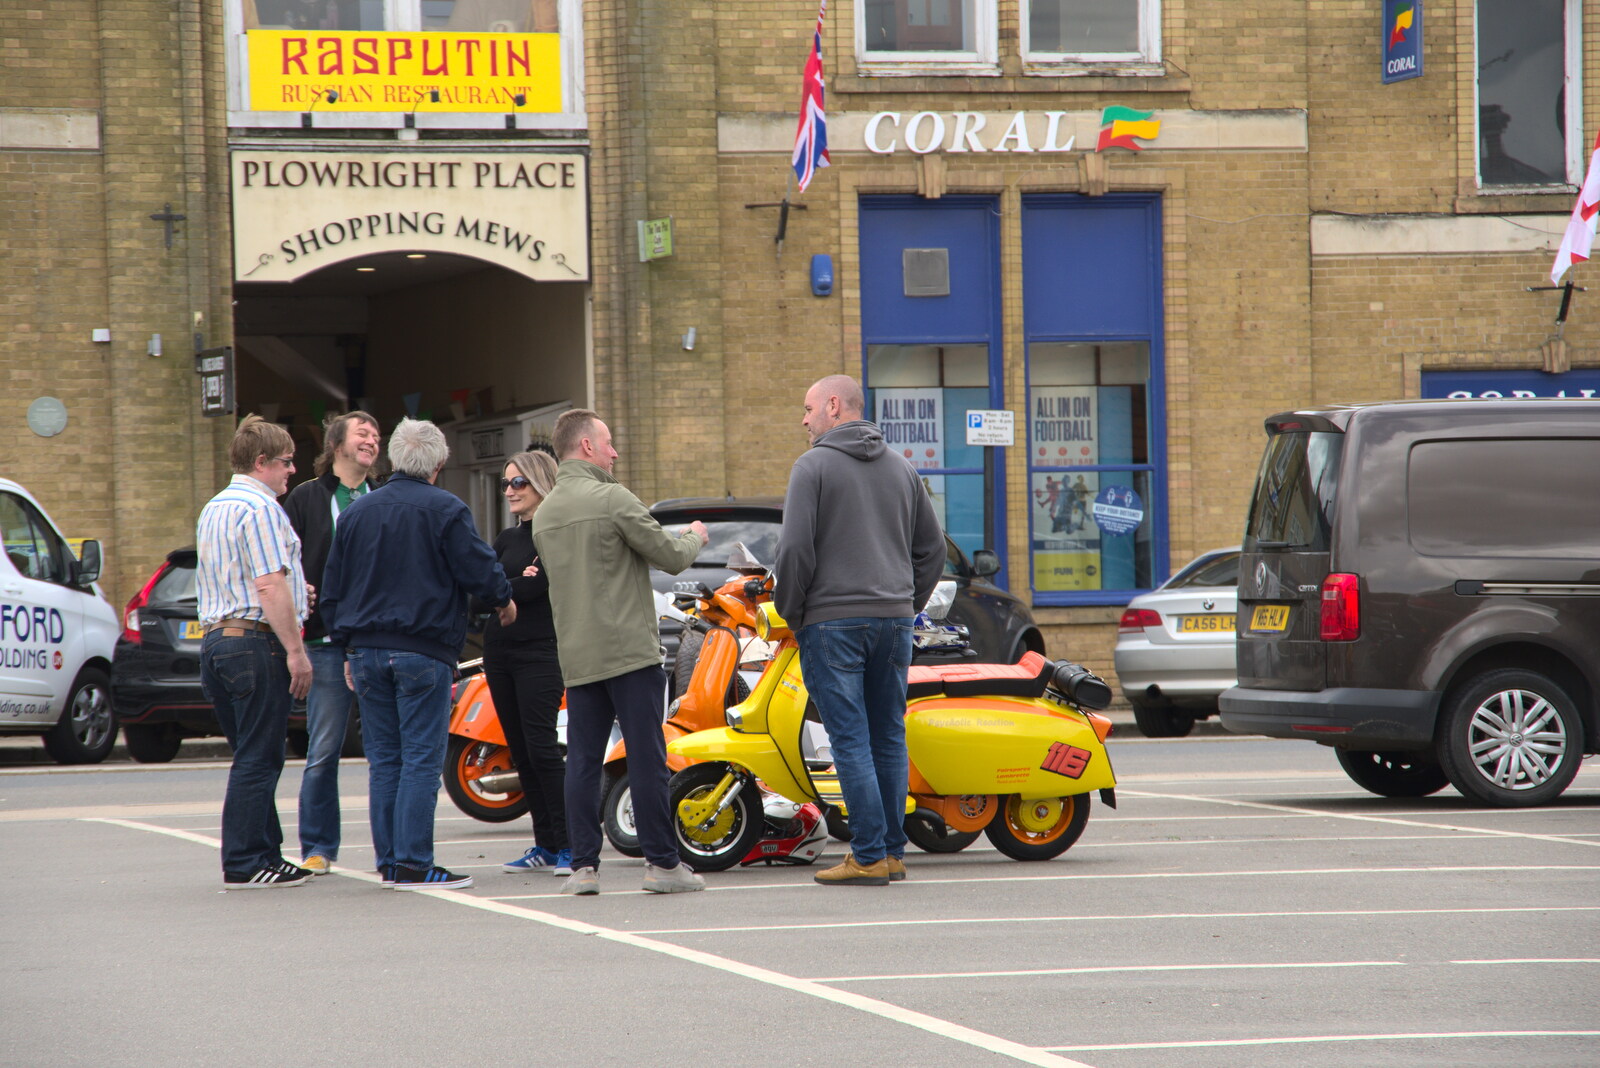 There's some sort of moped gathering from A Vaccination Afternoon, Swaffham, Norfolk - 9th May 2021